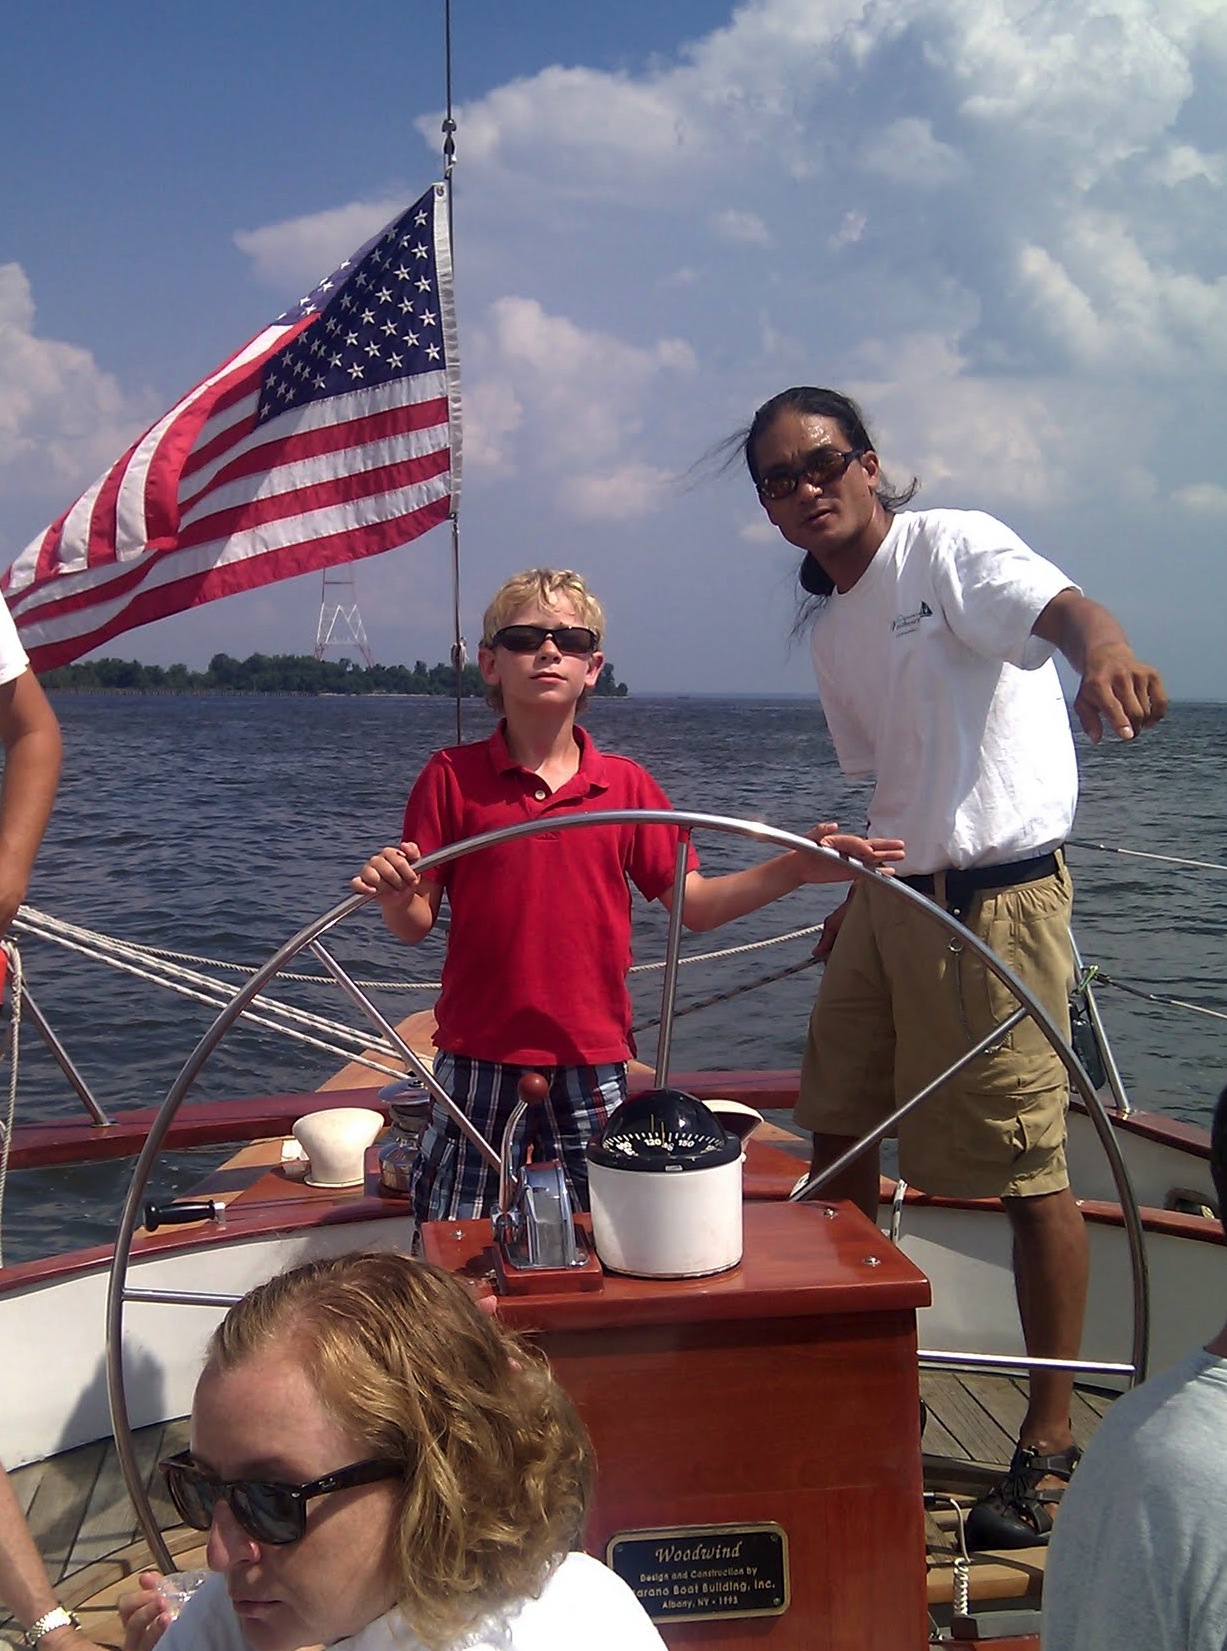 Young boy being shown which way to go by the captain of the boat